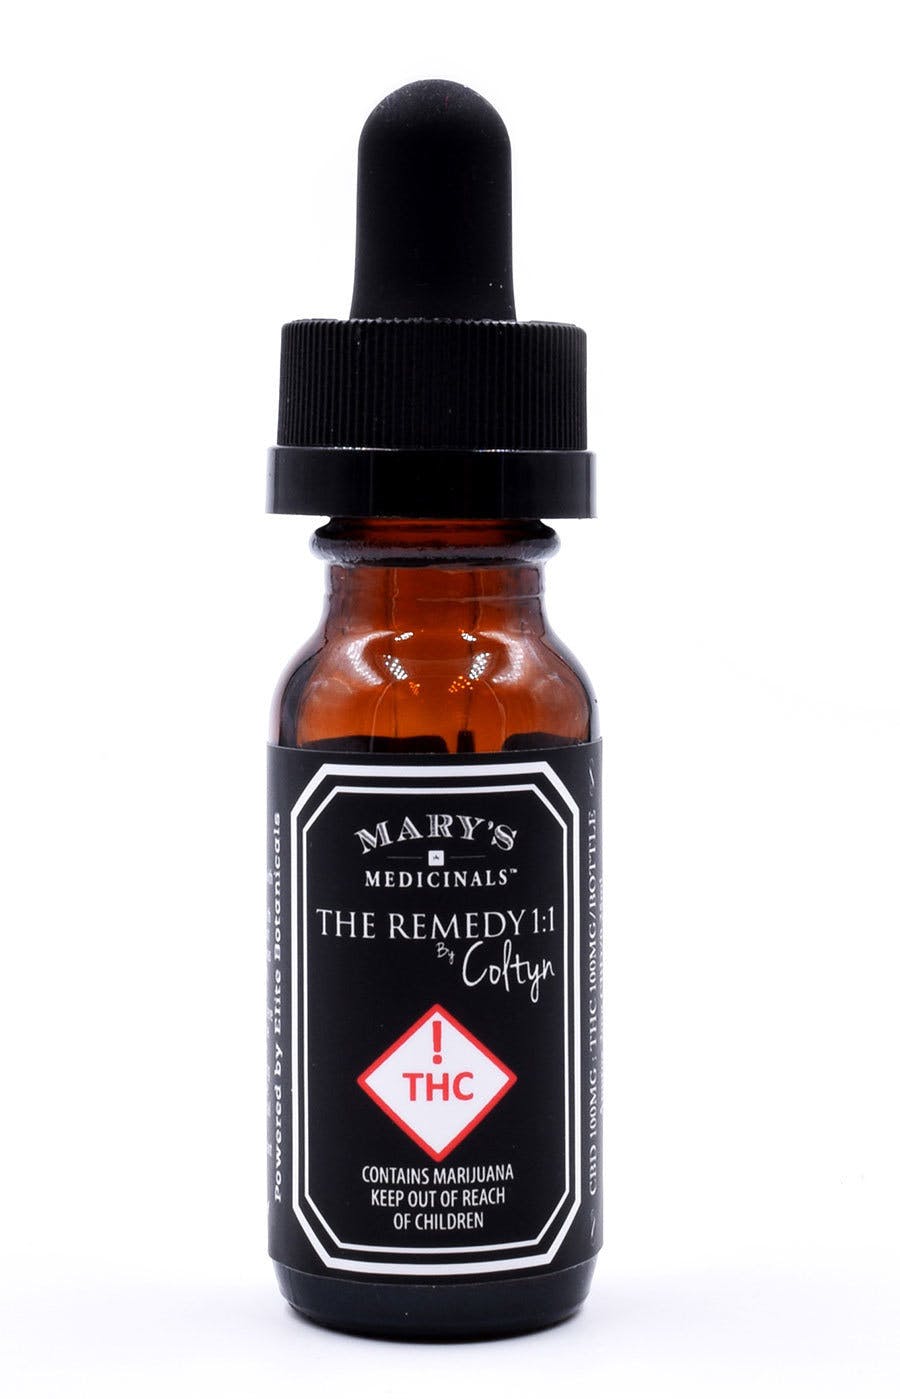 tincture-the-remedy-11-concentrated-cbd-and-thc-oil-marys-medicinals